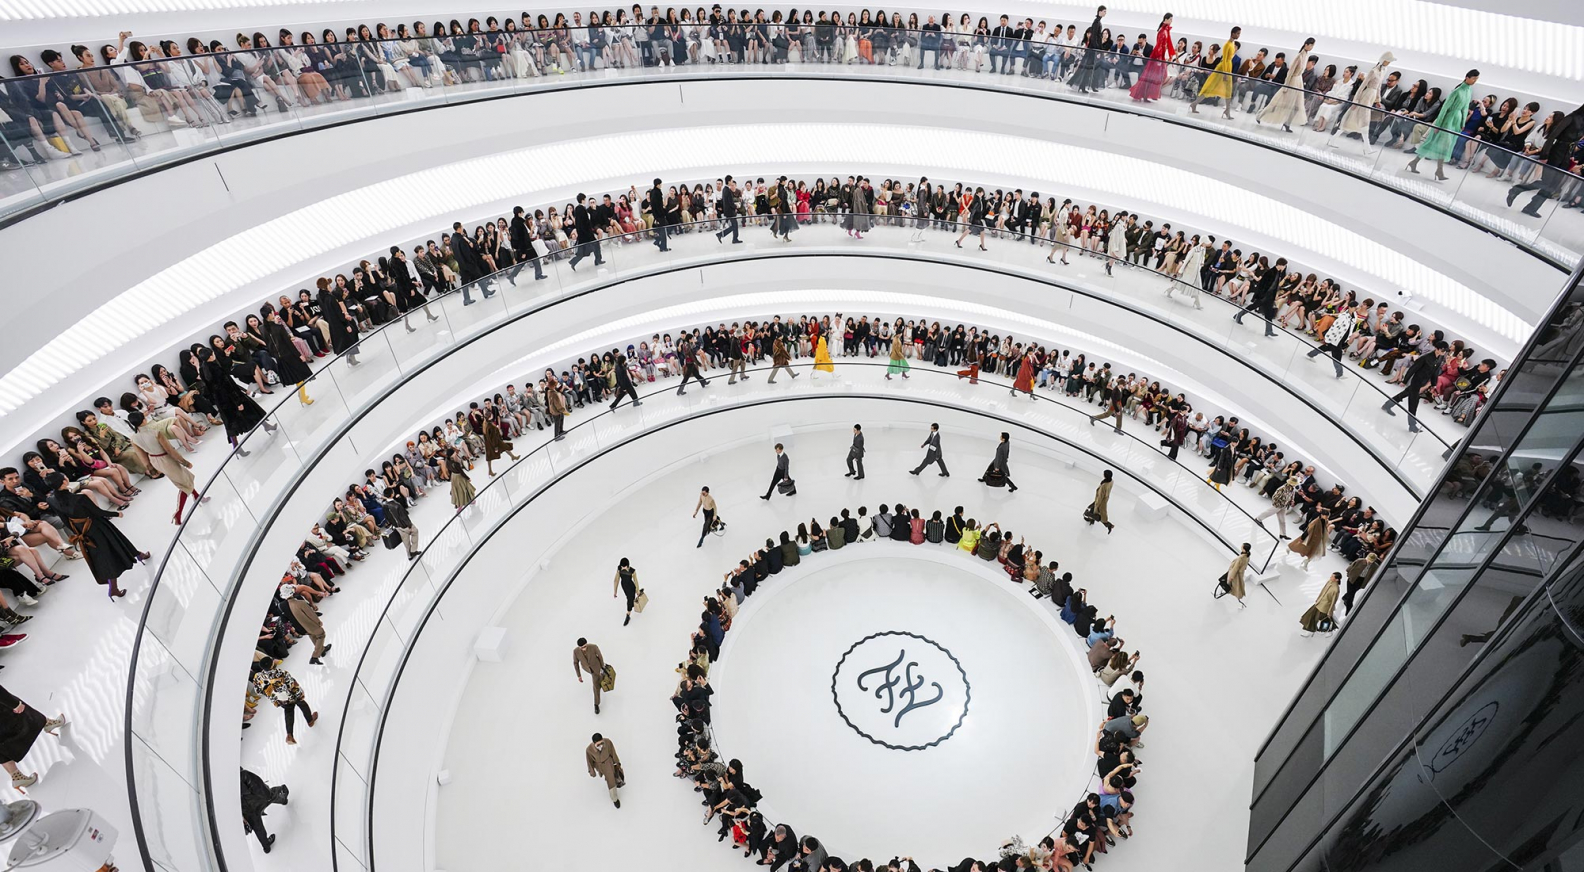 Fendi celebrates legacy of Karl Lagerfeld with presentation of Women's and Men's Fall/Winter 2019-2020 in Shanghai - LVMH